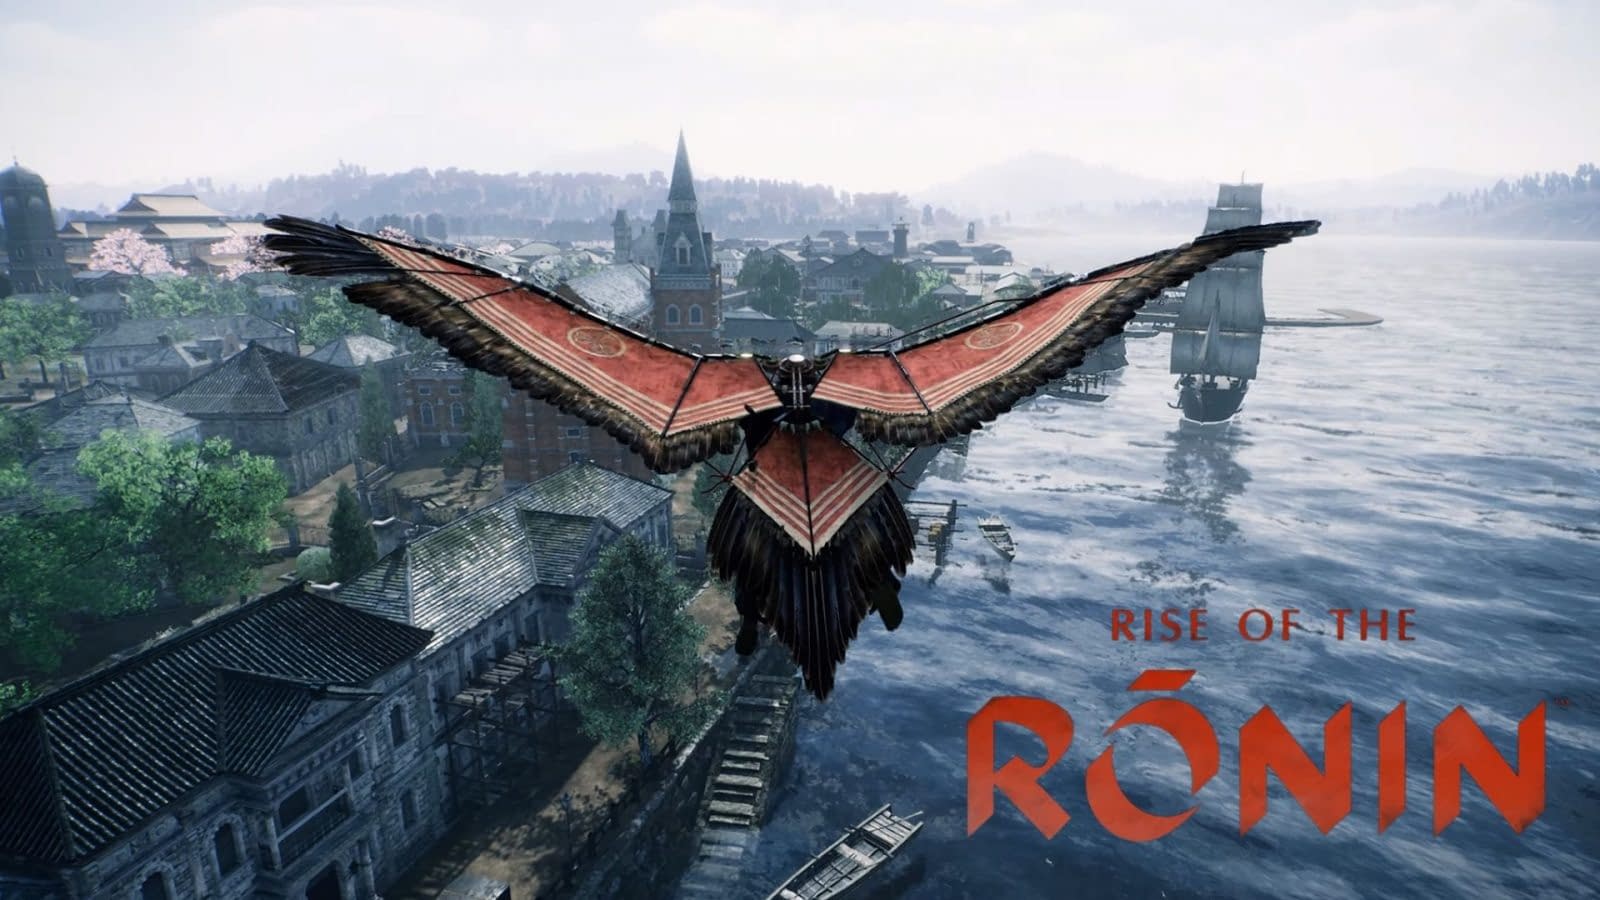 How Was Rise of the Ronin?